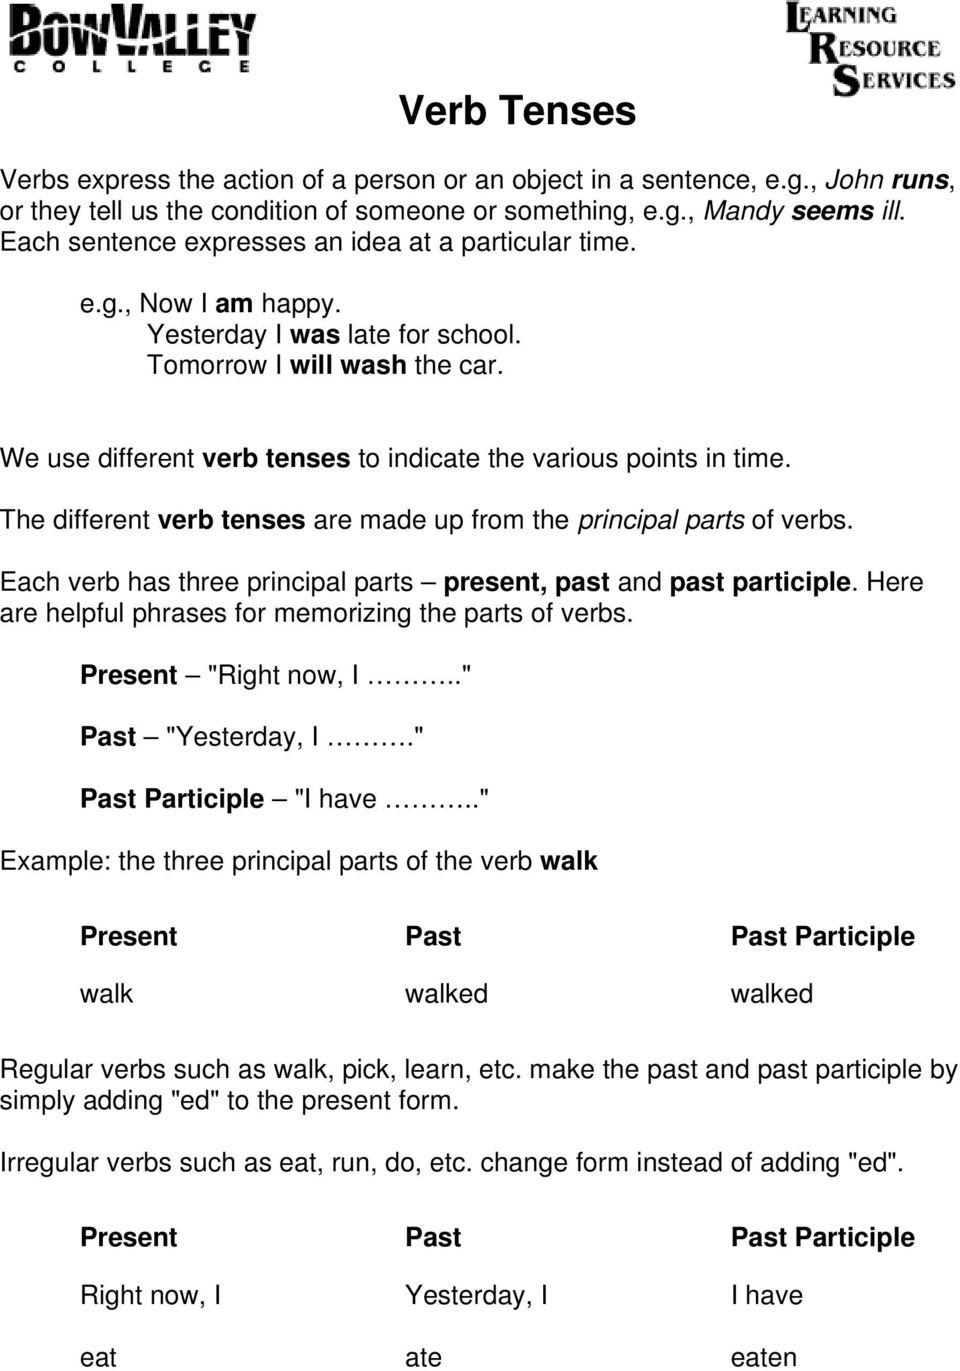 We use different verb tenses to indicate the various points in time. The different verb tenses are made up from the principal parts of verbs.